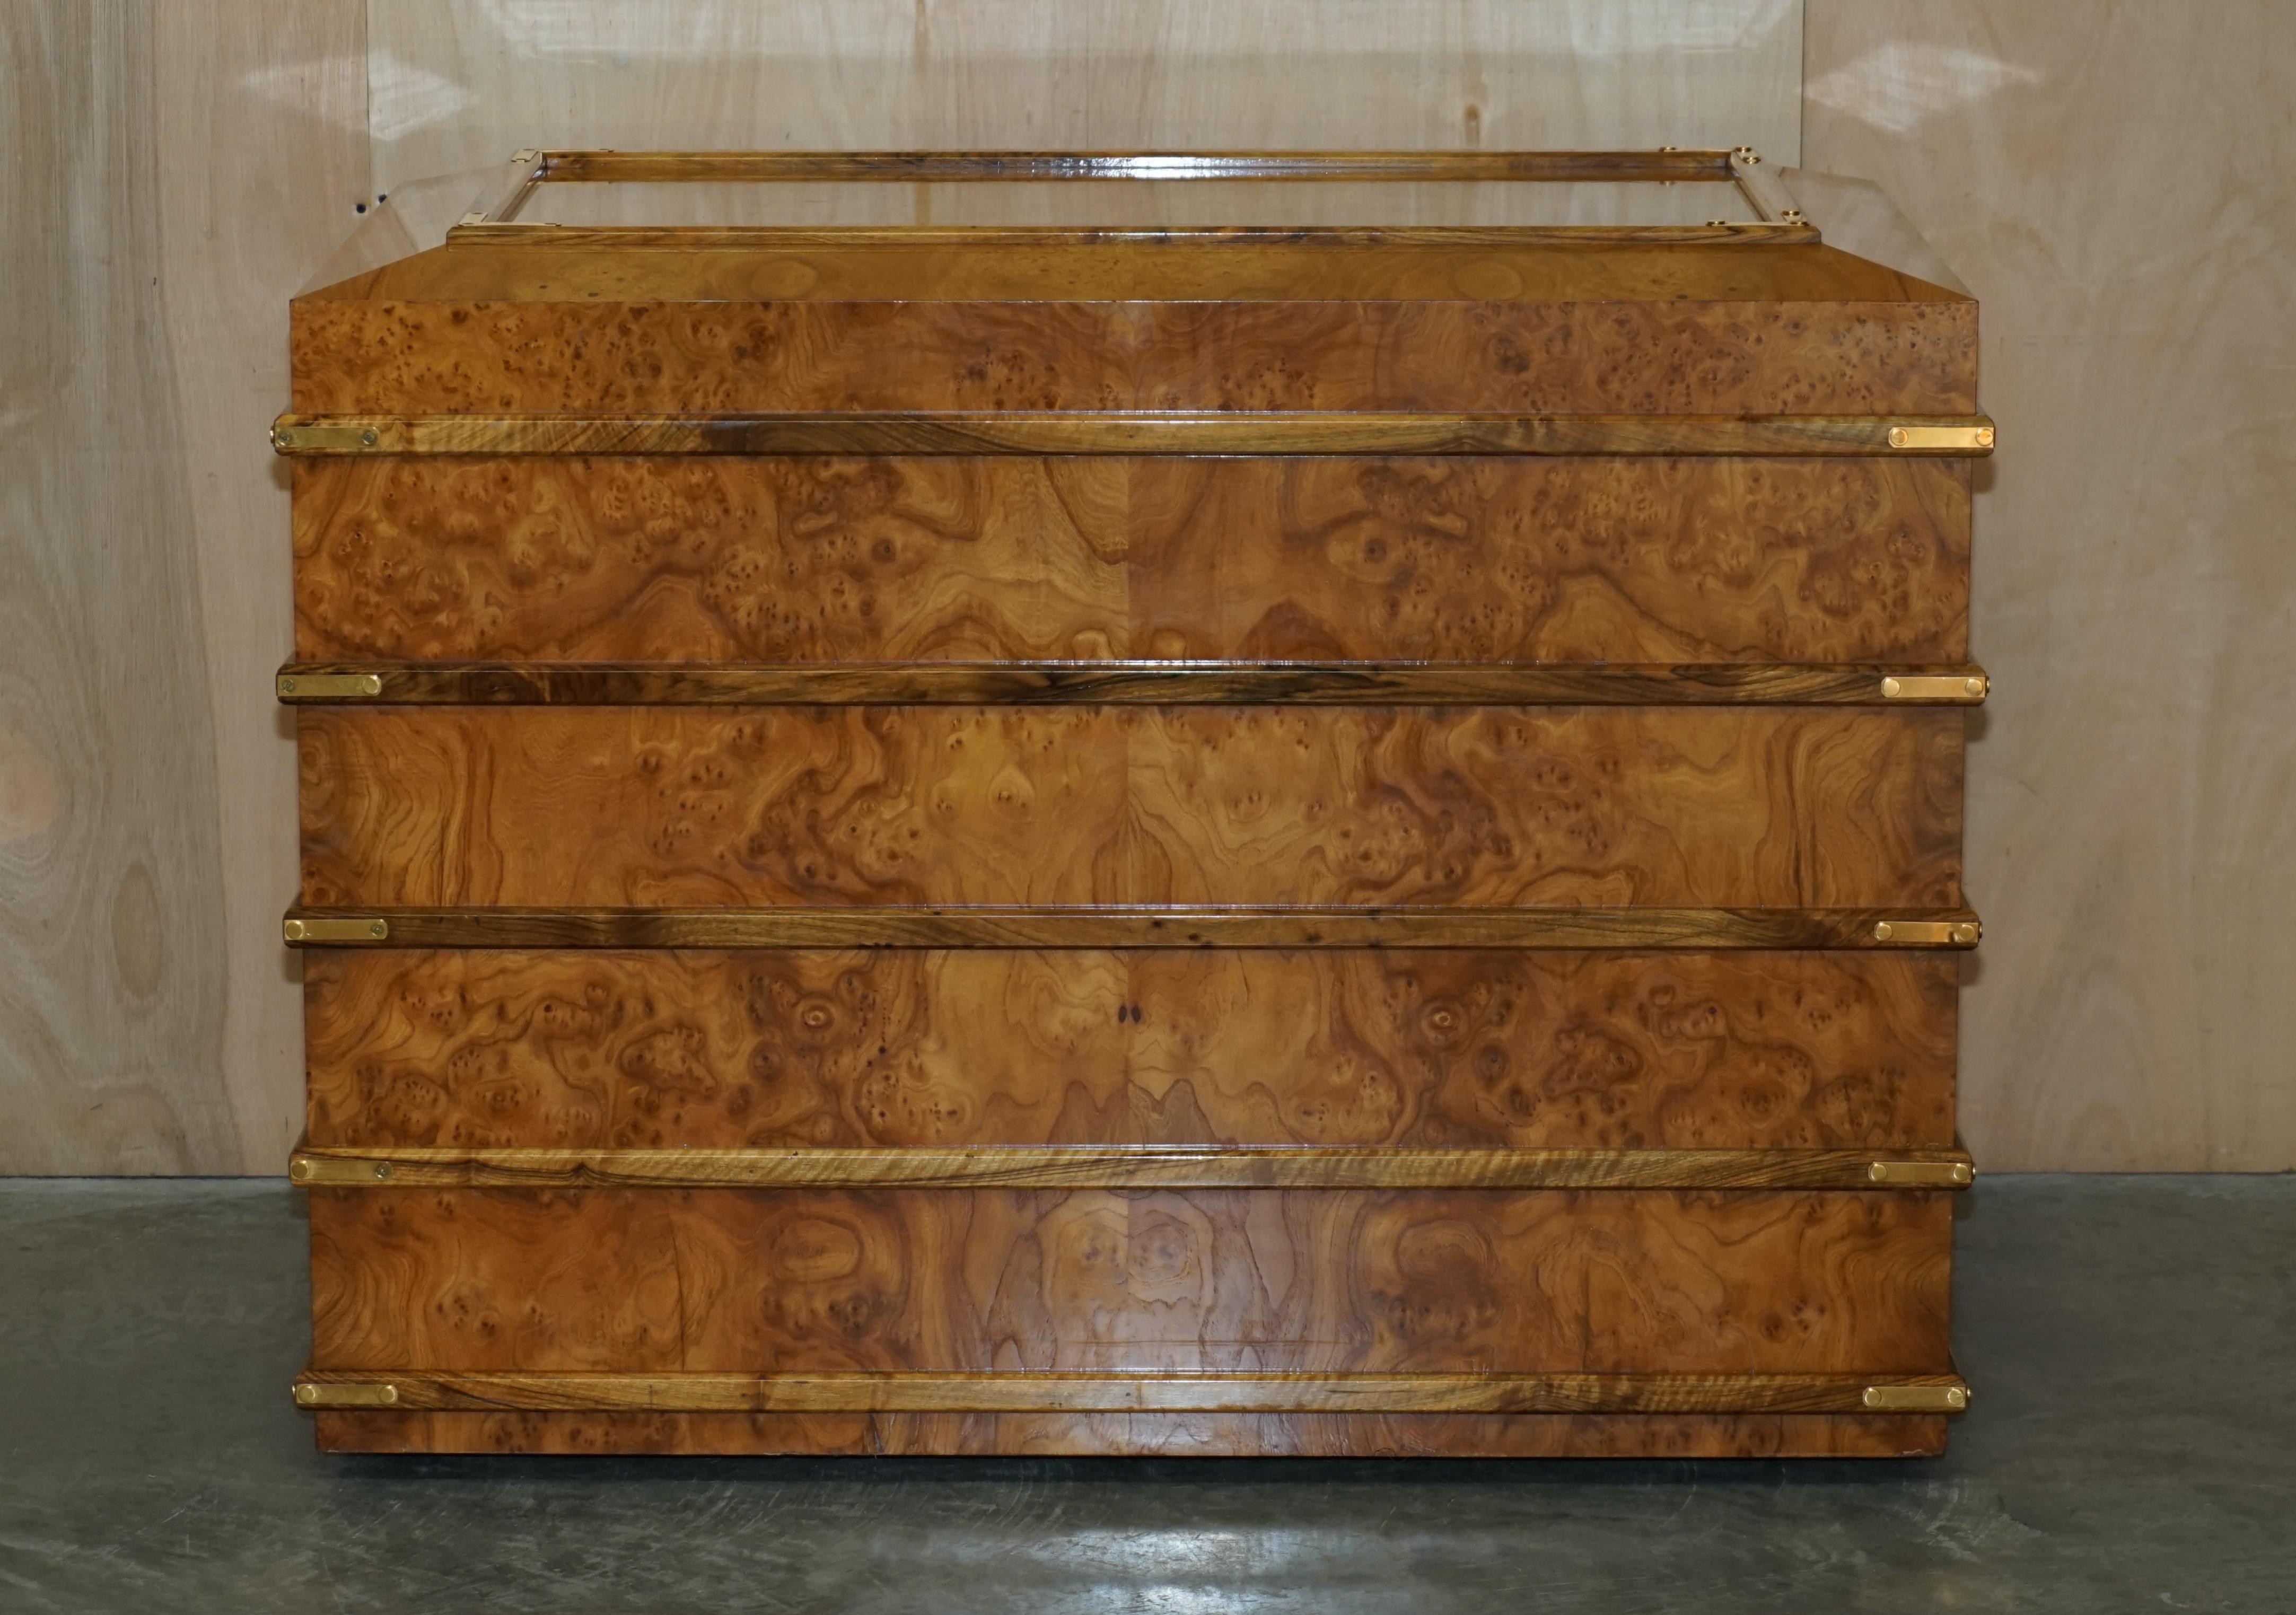 We are delighted to offer for sale this absolutely massive, Burr Walnut, trunk or chest with a false bottom for hidden storage 

Please note the delivery fee listed is just a guide, it covers within the M25 only for the UK and local Europe only